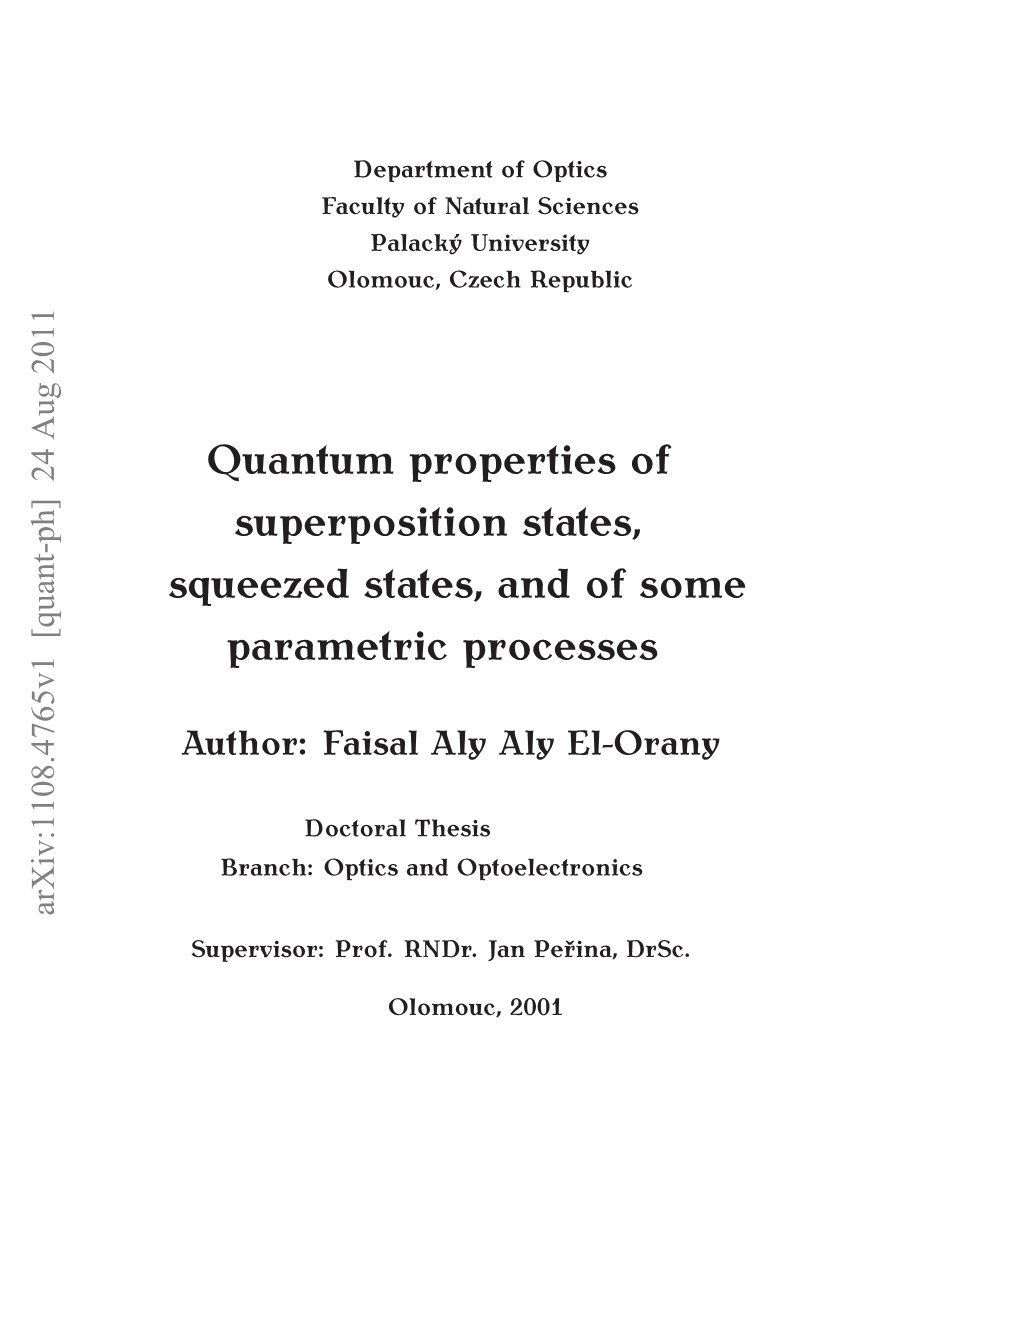 Quantum Properties of Superposition States, Squeezed States, and Of